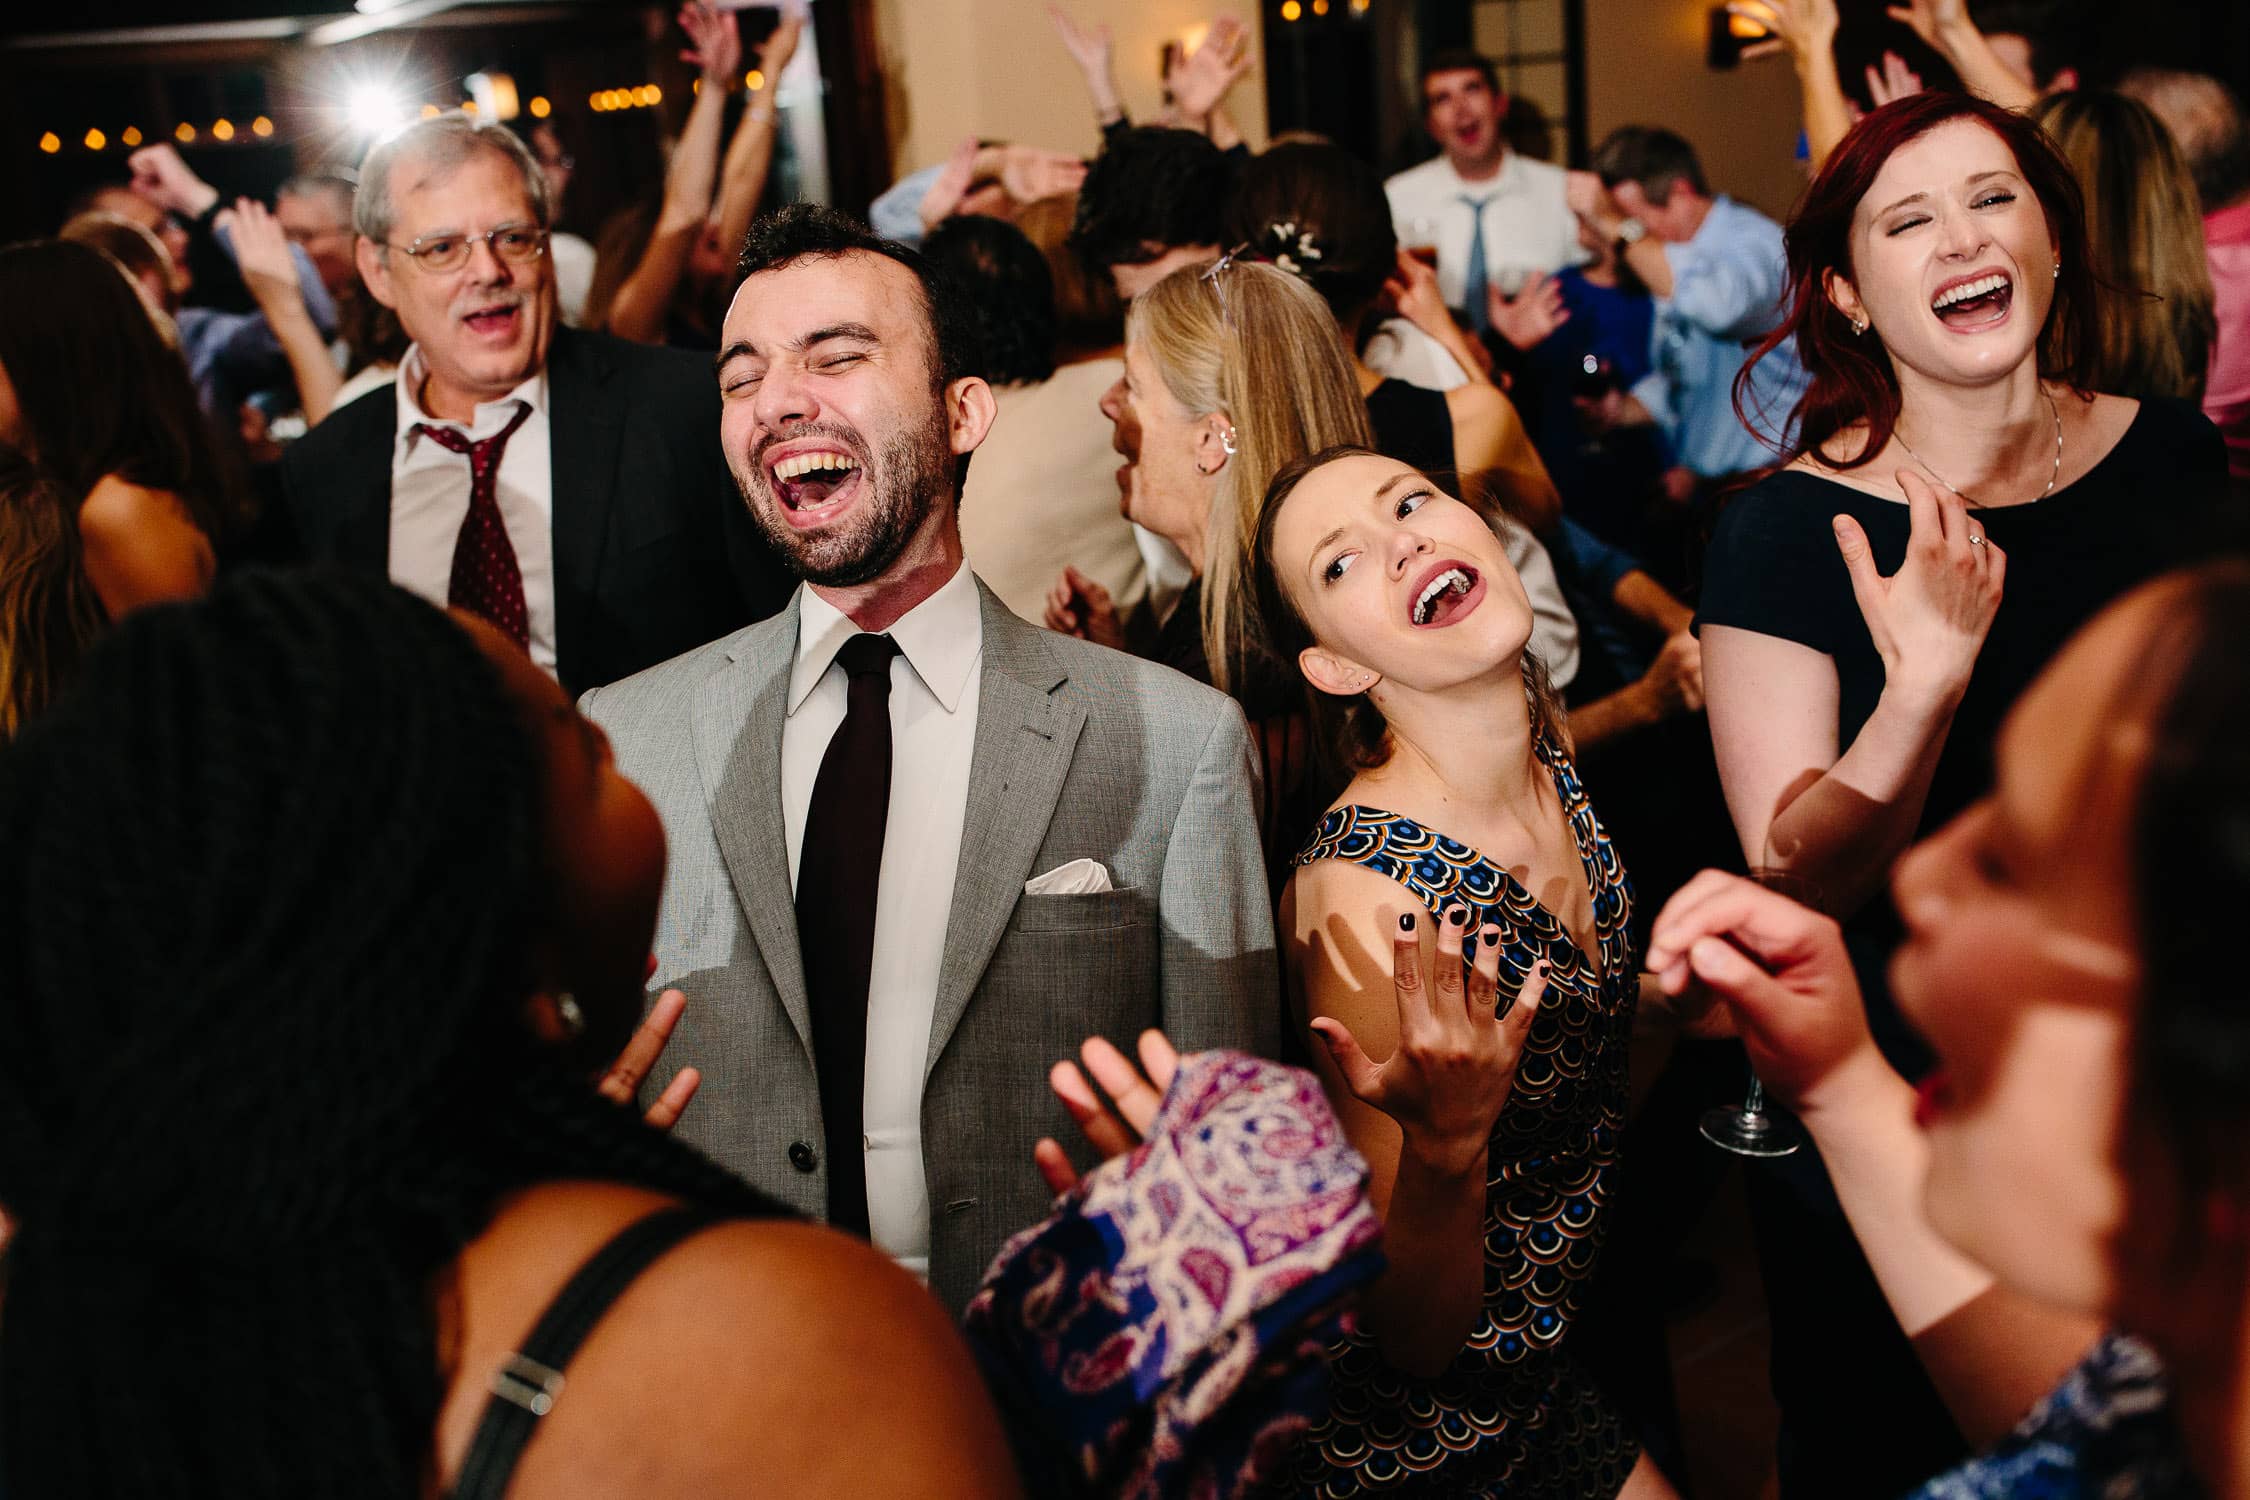 guests enthusiastically singing along on dance floor at wedding reception